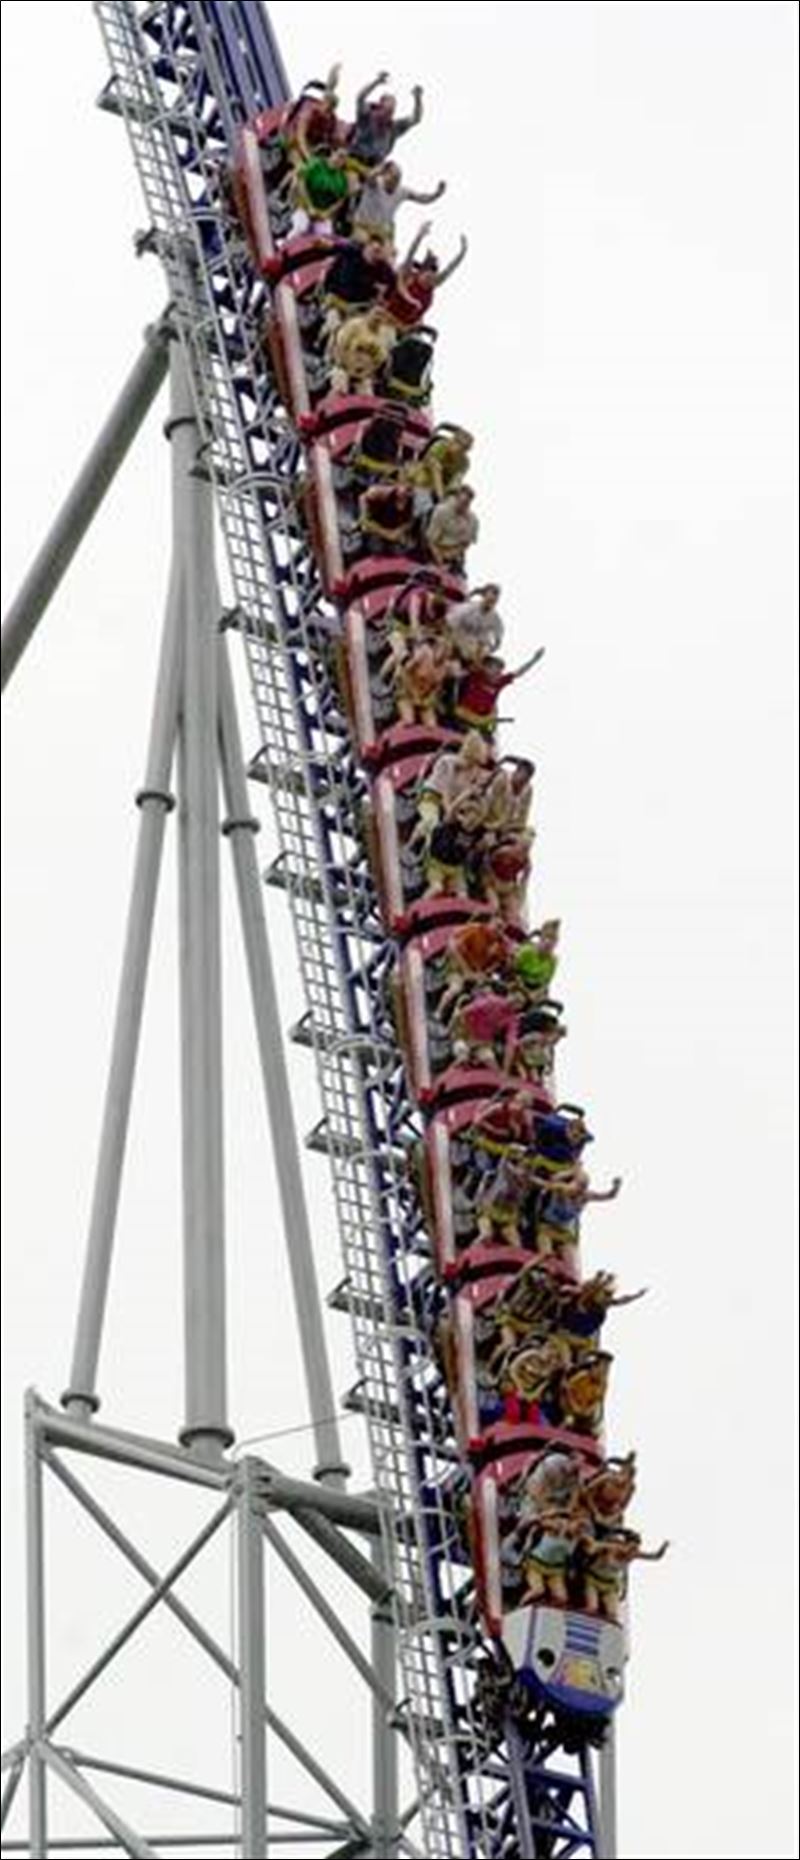 Cedar Point steps onto thrill ride of its own by slashing prices ...